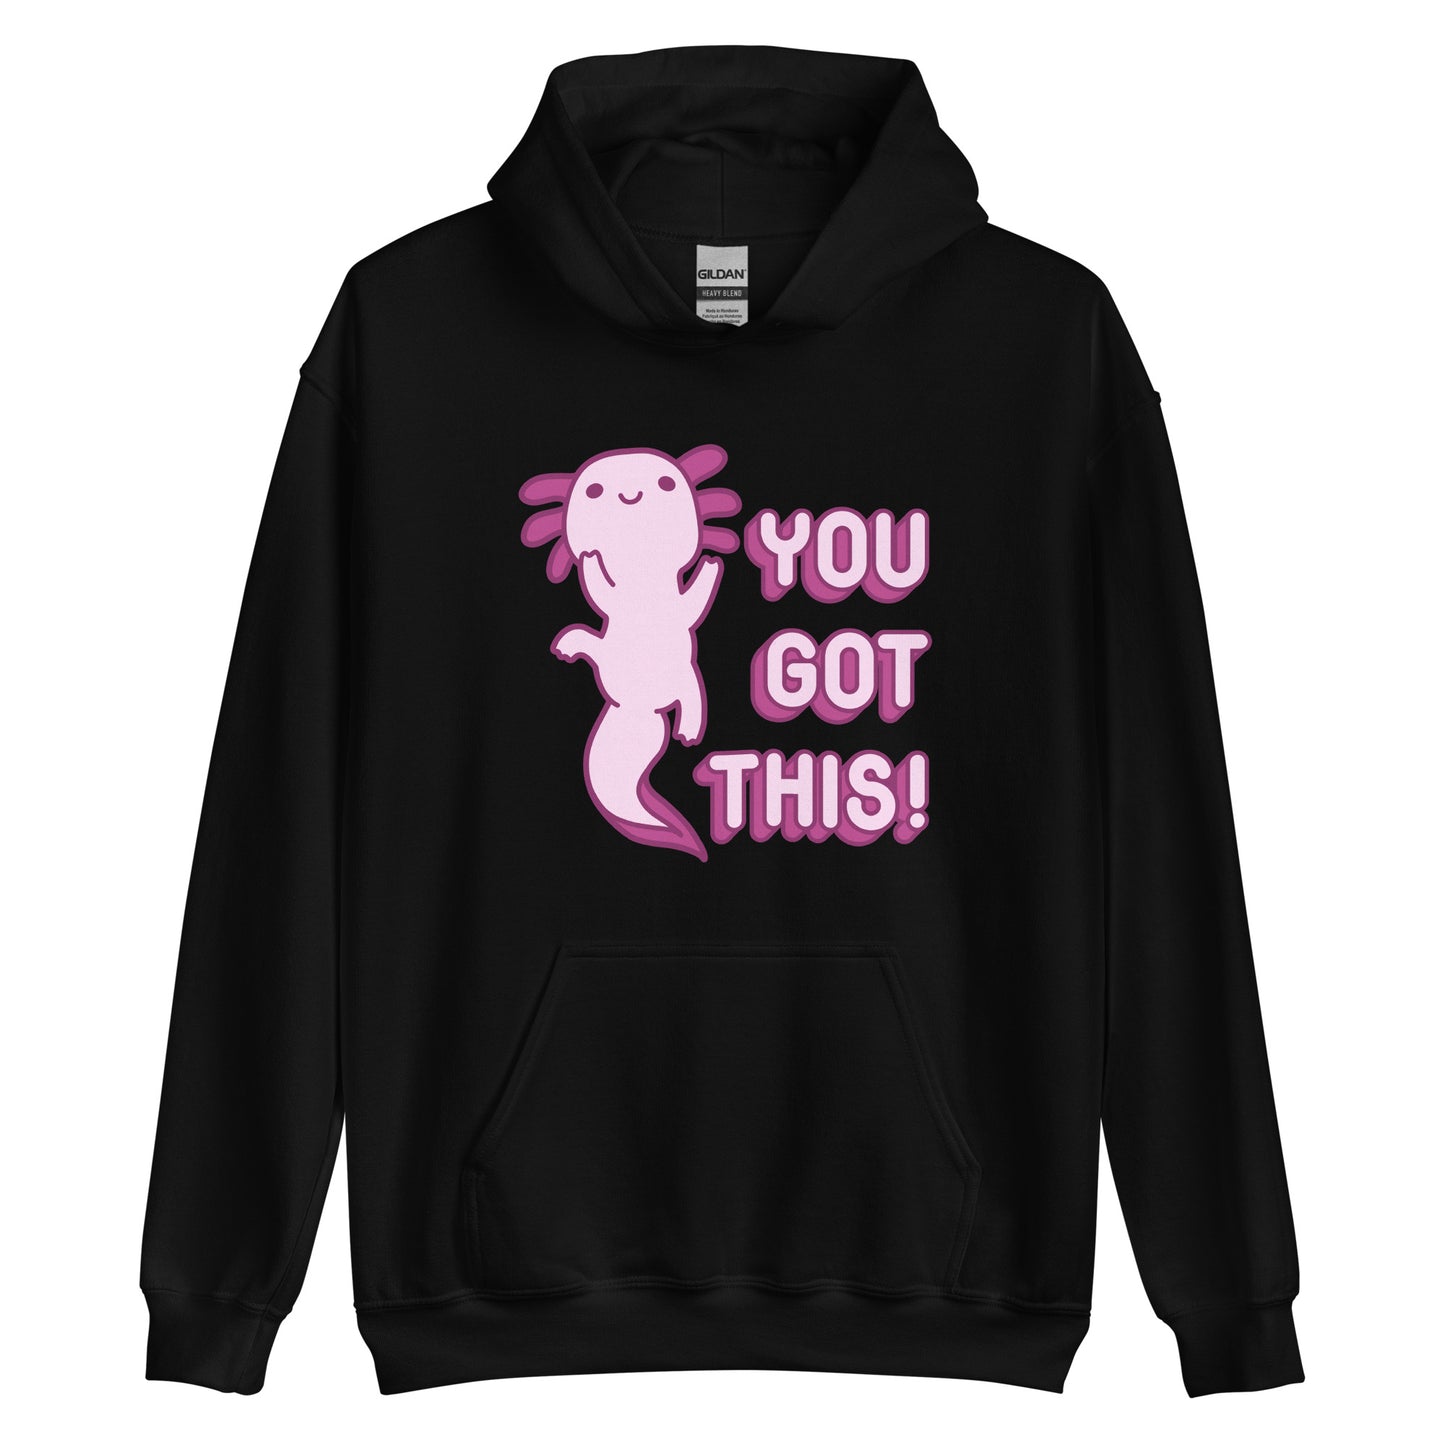 A black hooded sweatshirt with front pouch pocket featuring a picture of a pink axolotl and text reading "You Got This!" in pink bubble letters